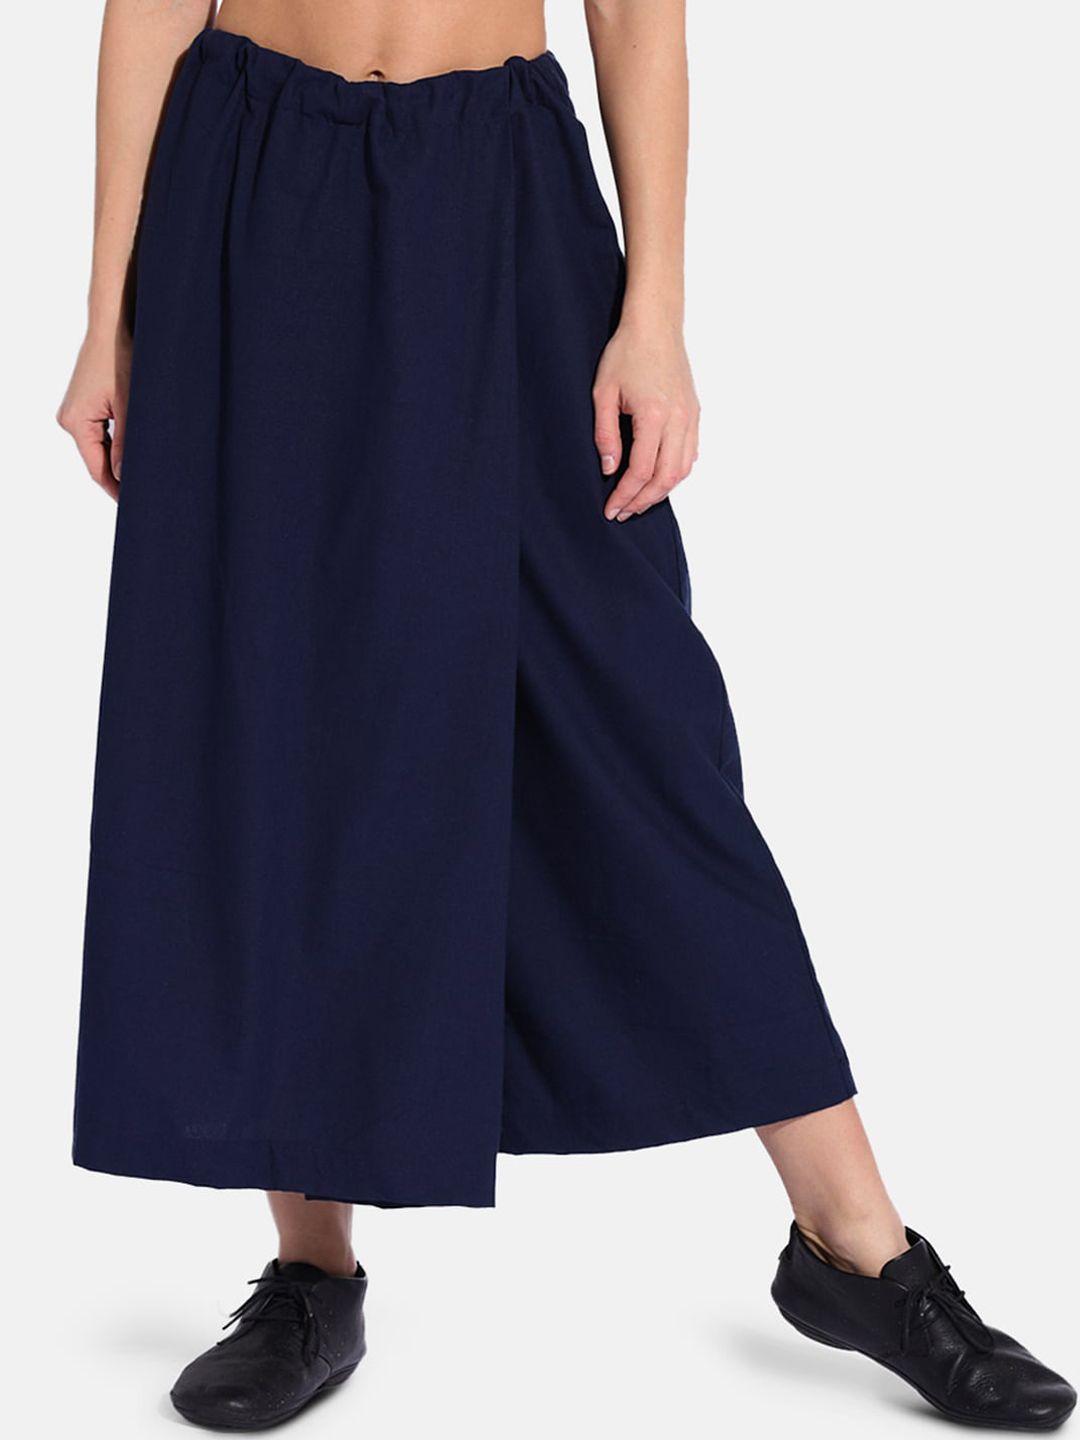 grass by gitika goyal women navy blue flared pleated culottes trousers